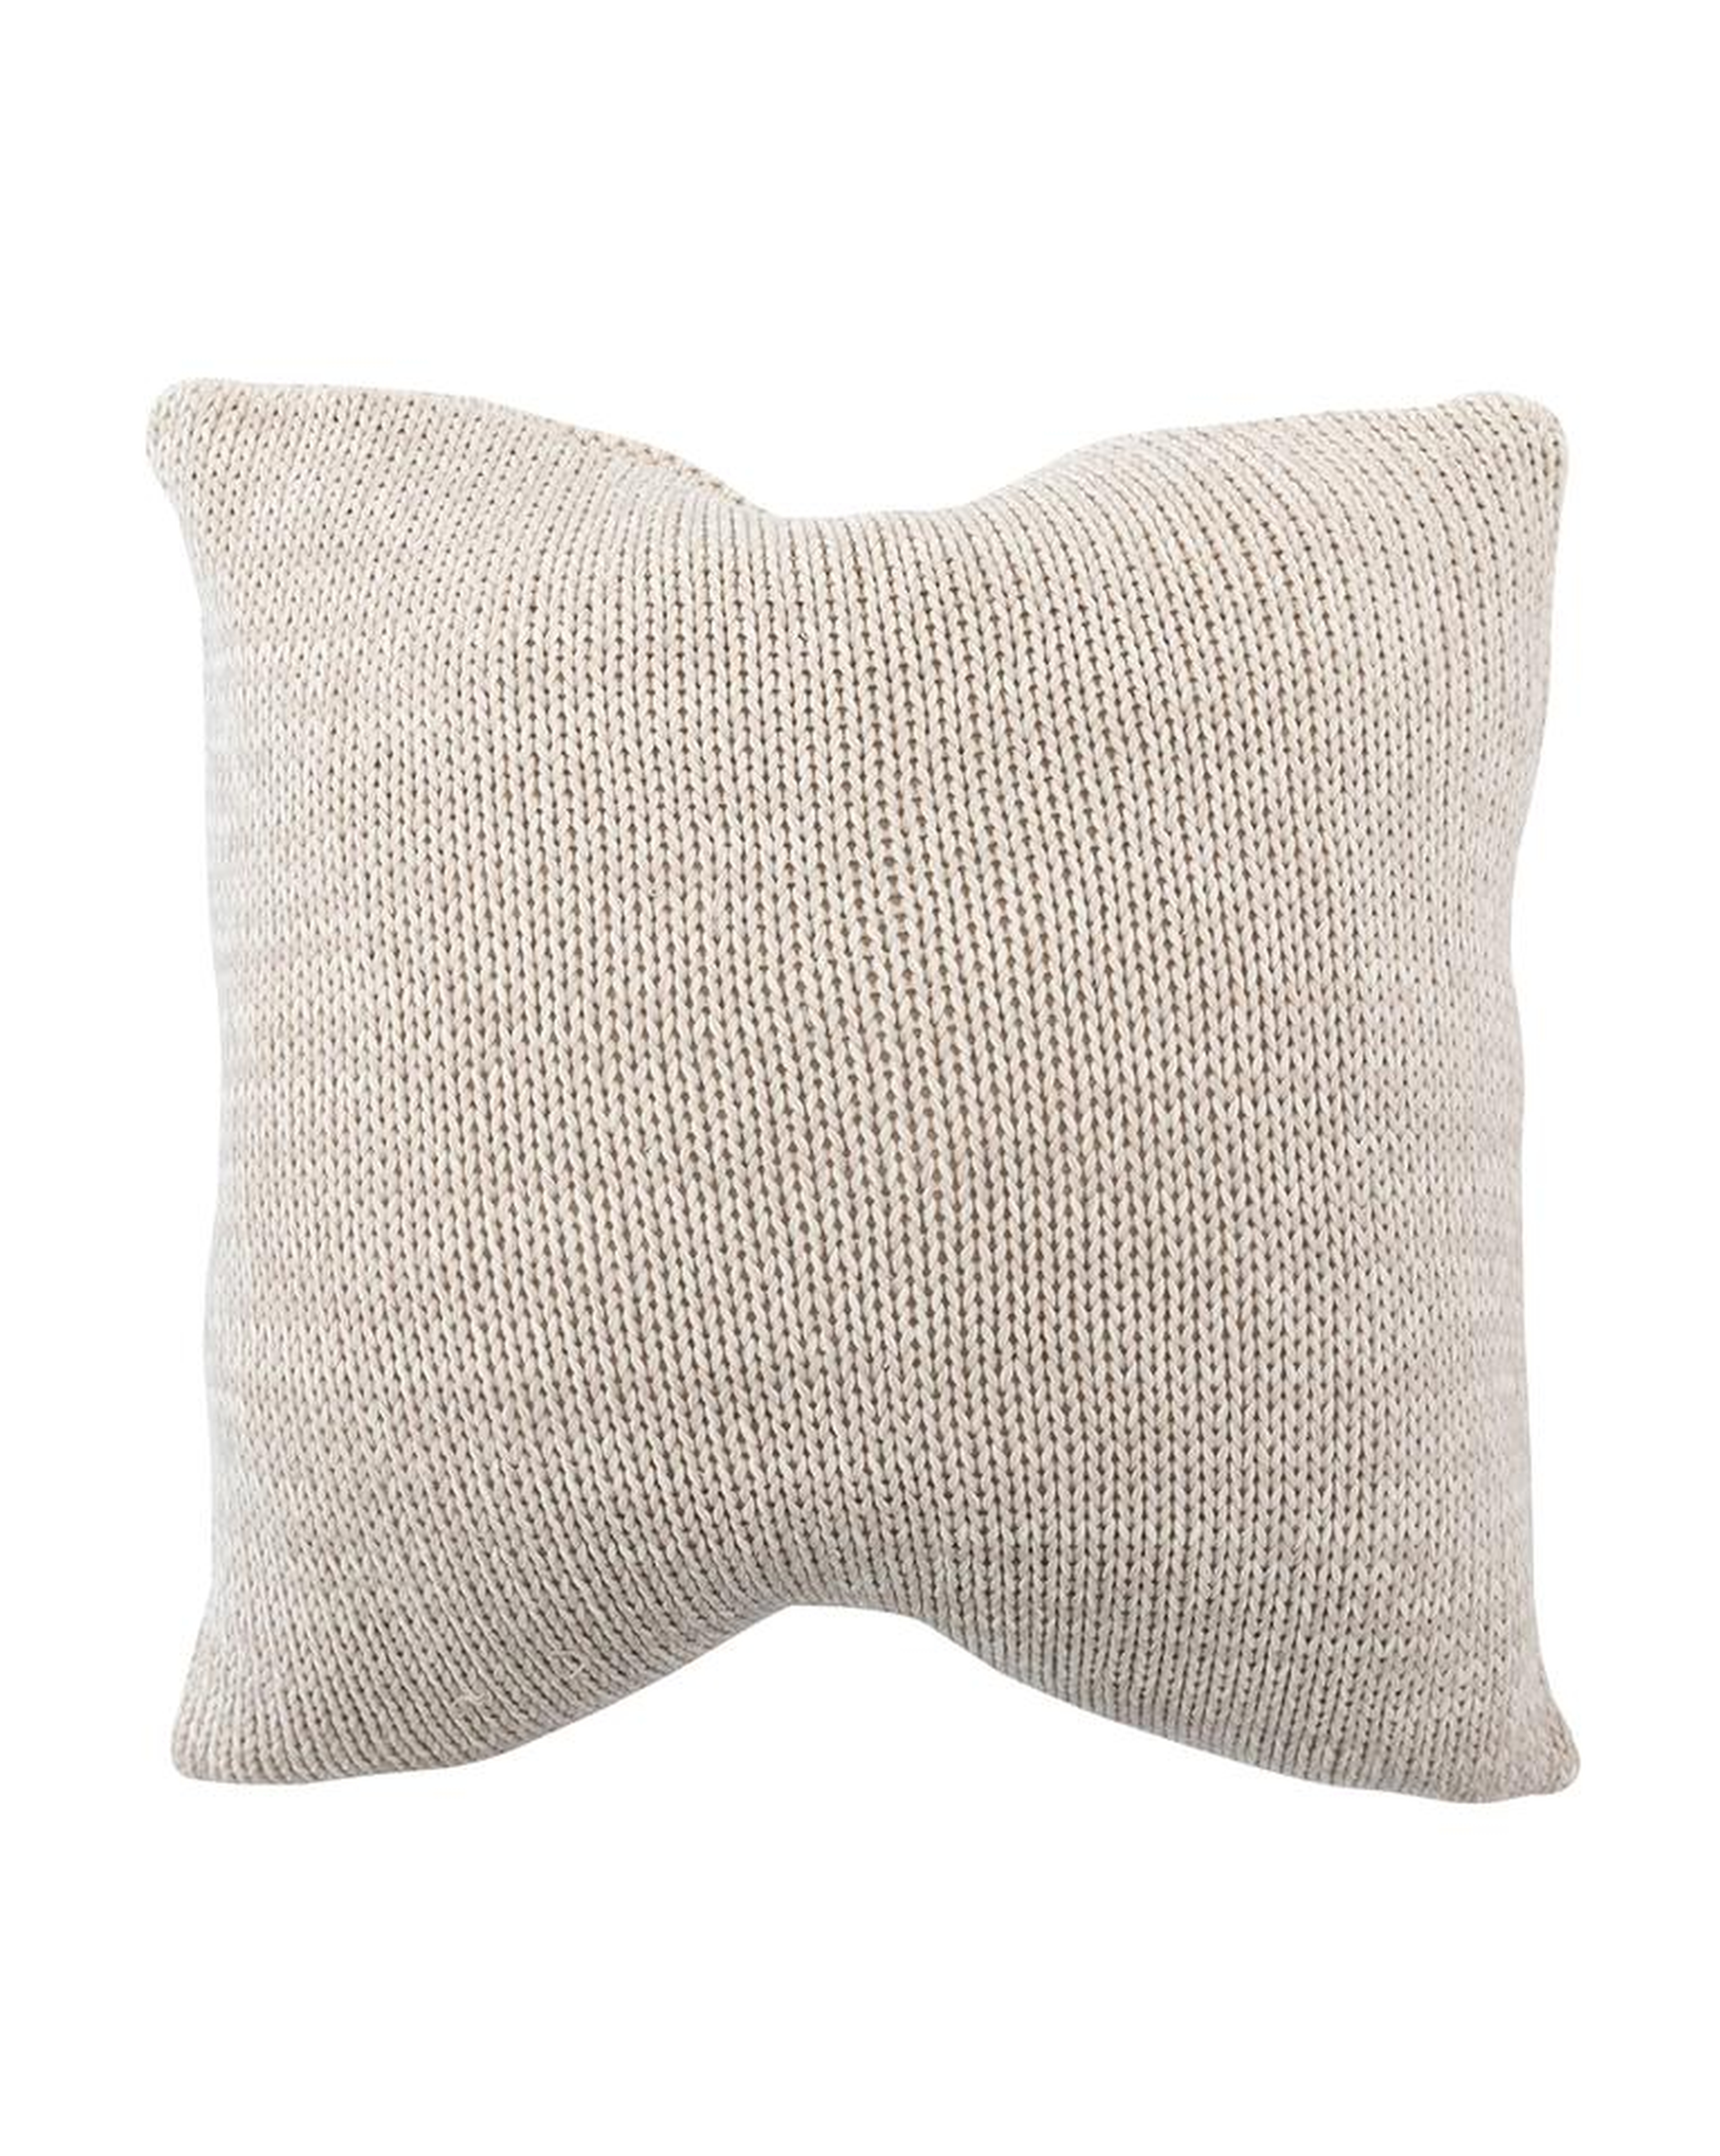 Libbey Knitted Cotton Pillow Cover, 22" x 22" - McGee & Co.